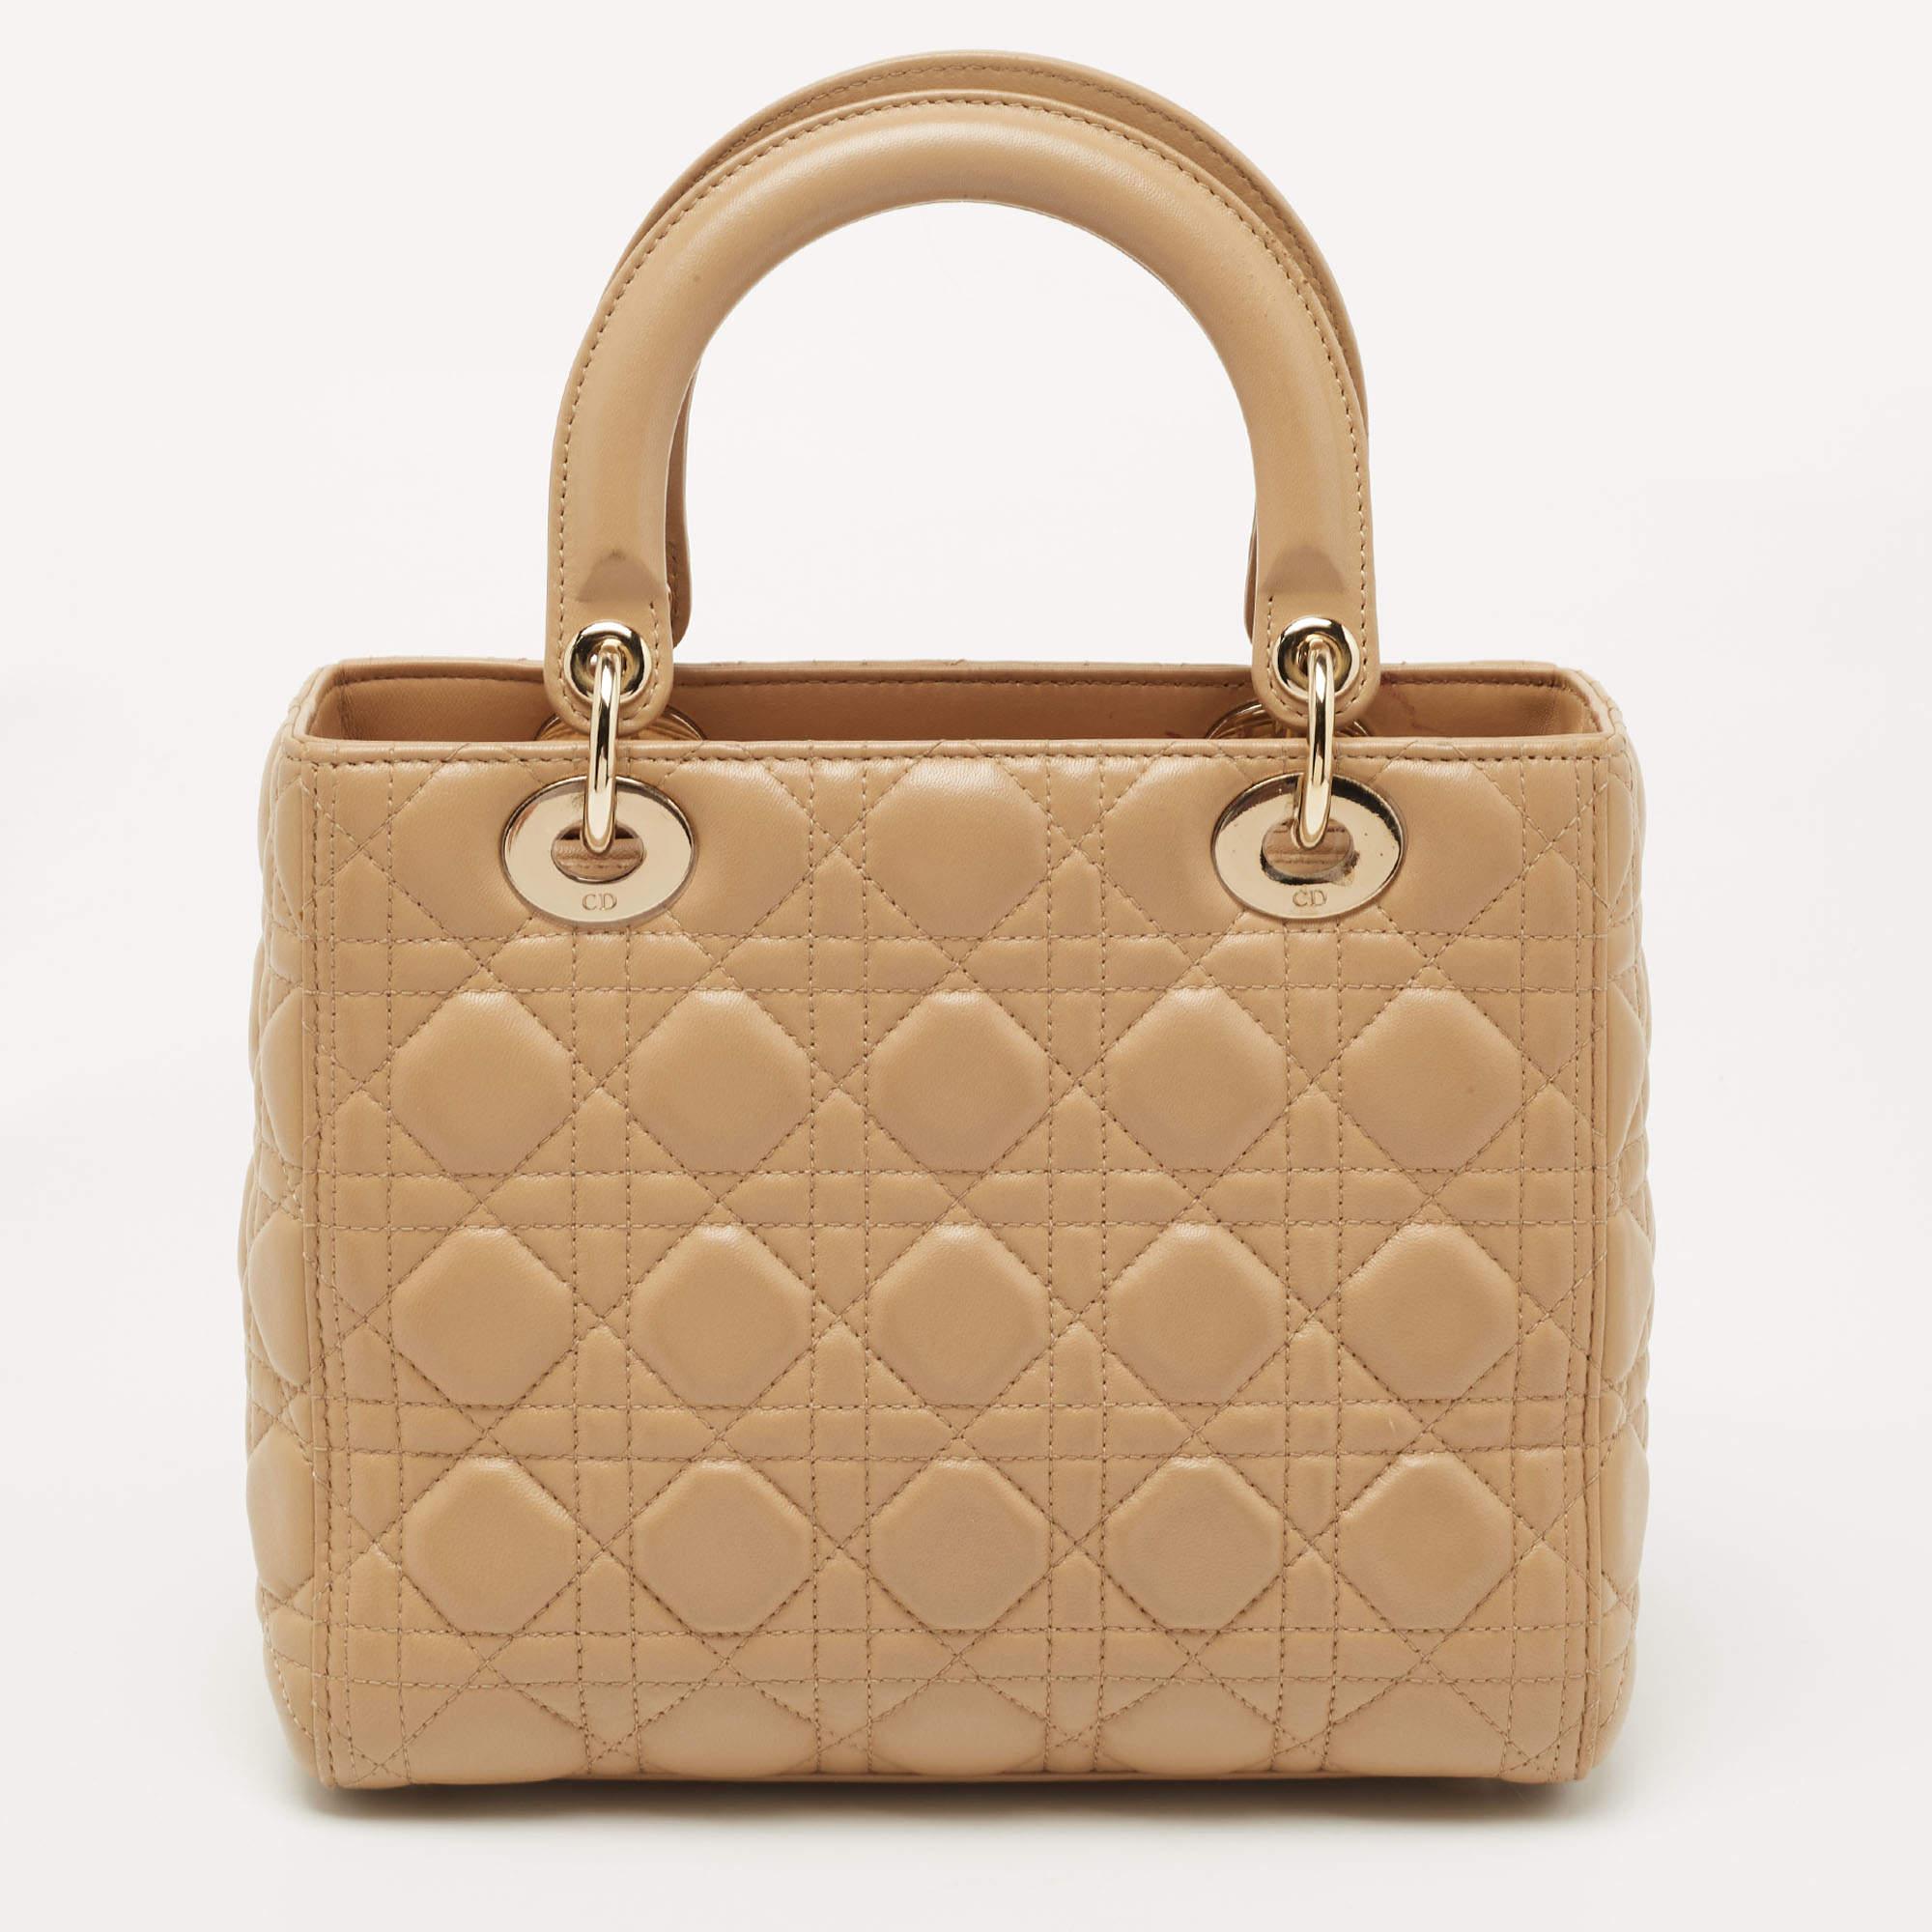 A timeless status and great design mark the Lady Dior tote. It is an iconic bag that people continue to invest in to this day. We have here this classic beauty crafted from beige Cannage leather. The bag has a lined interior for your essentials.